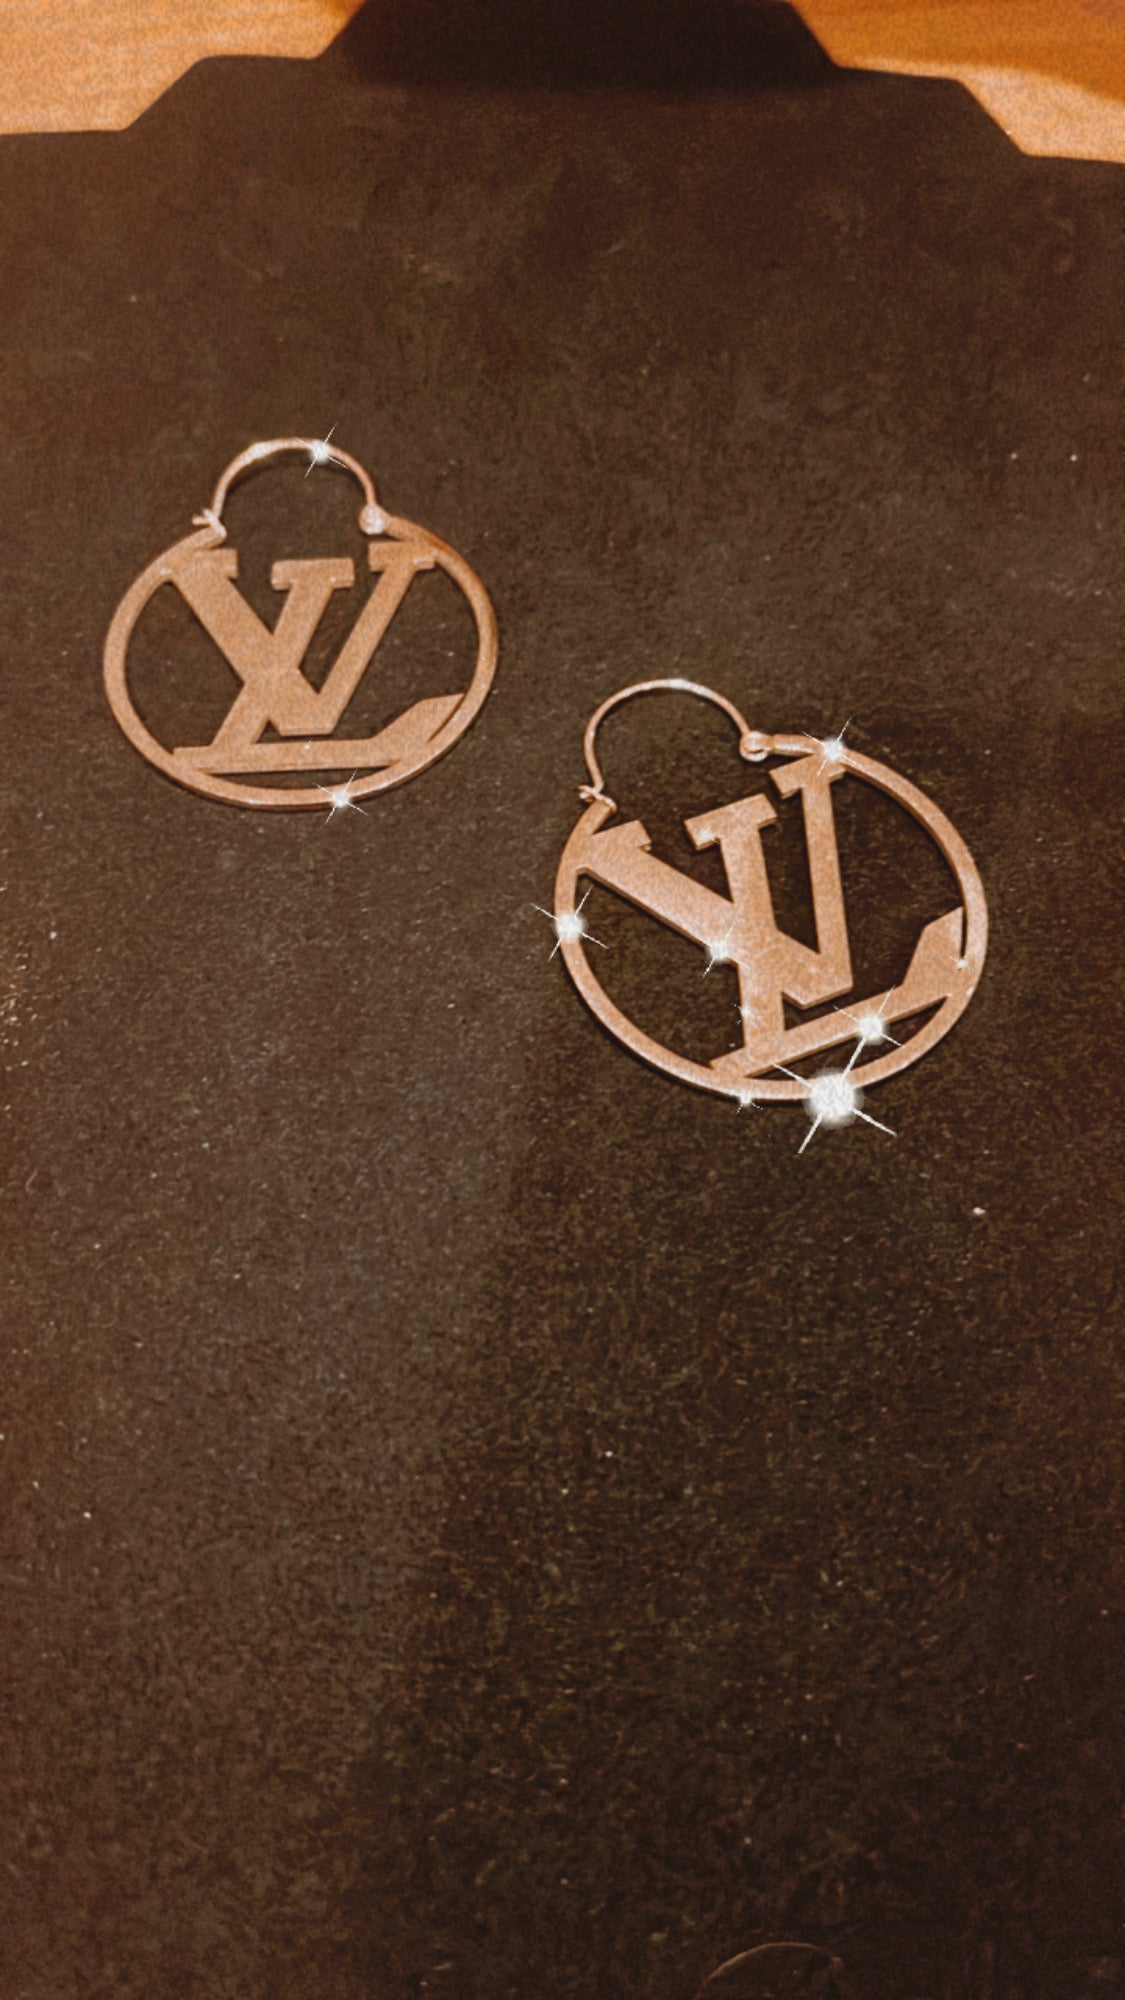 Gold LV Hoops